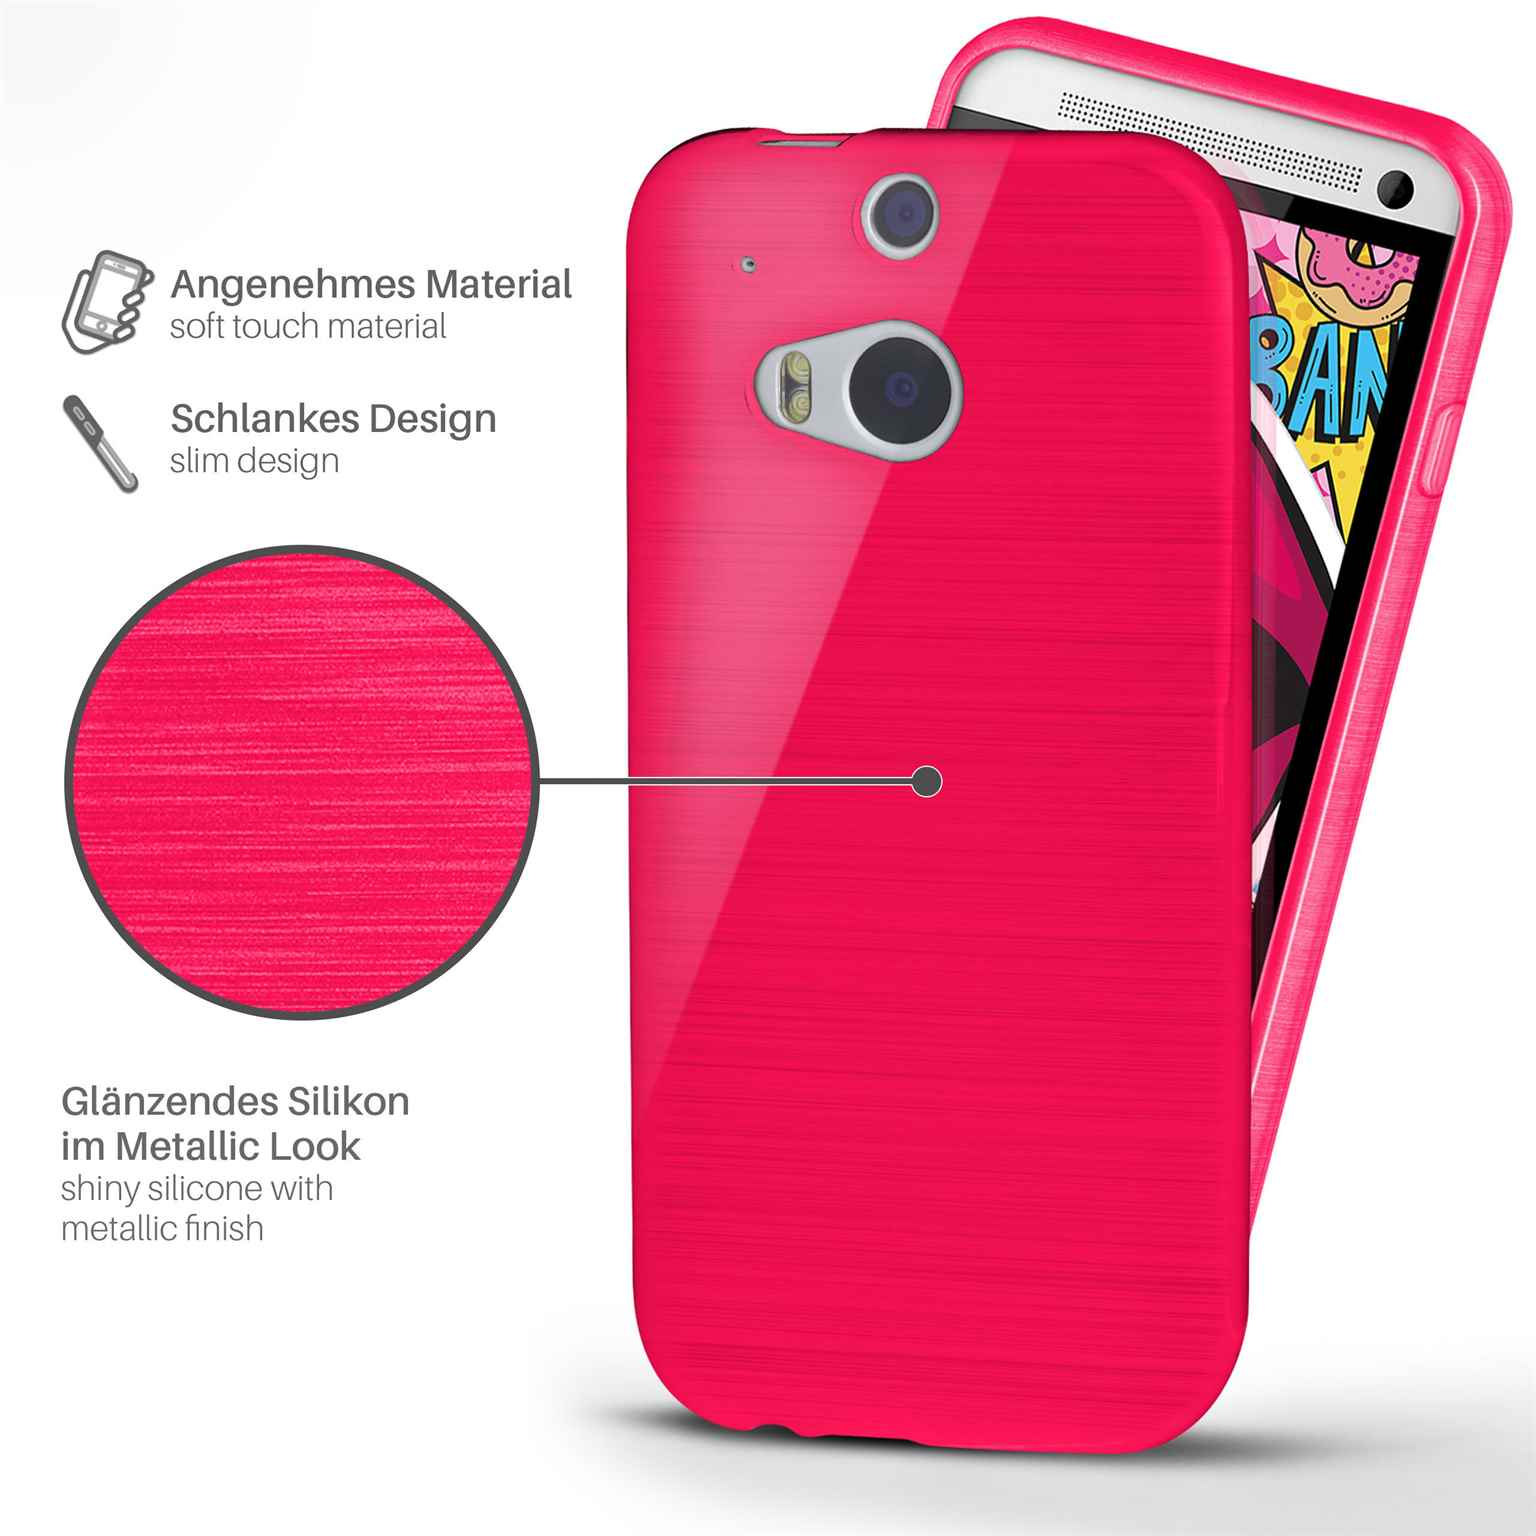 Backcover, M8, HTC, Case, MOEX Magenta-Pink Brushed One